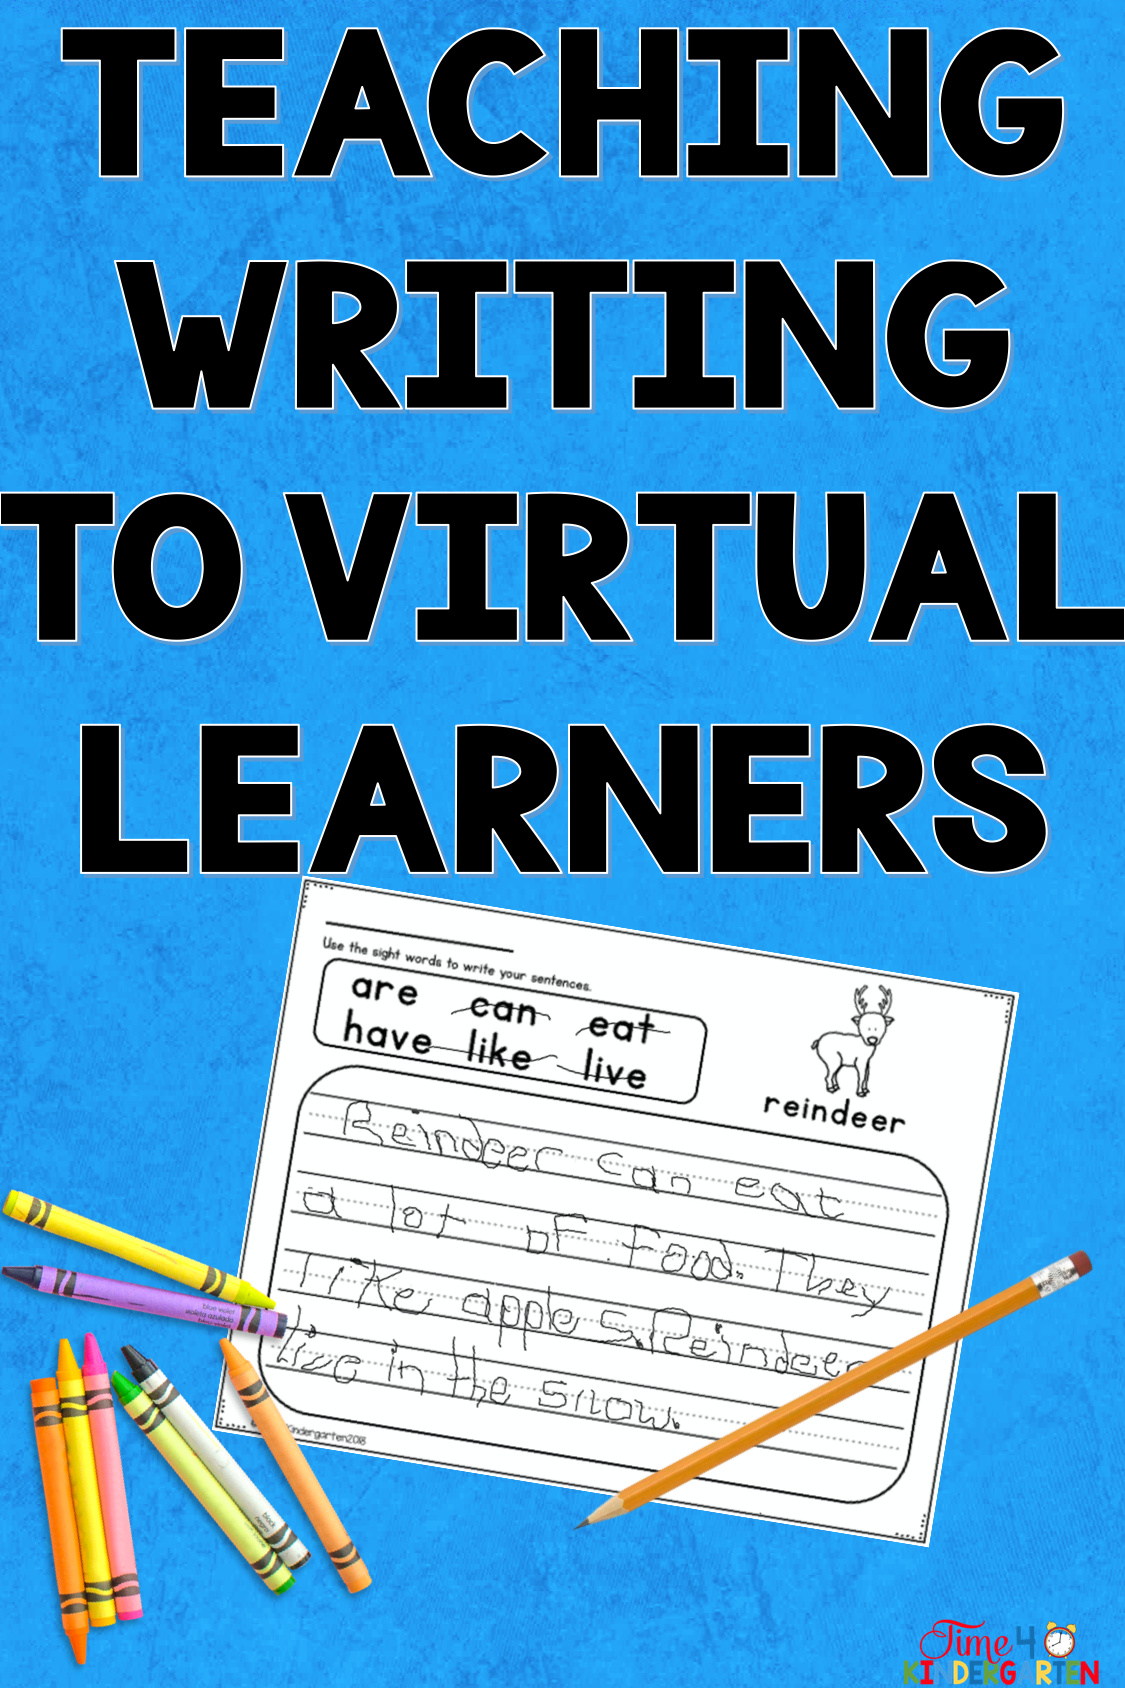 teaching writing while distant learning